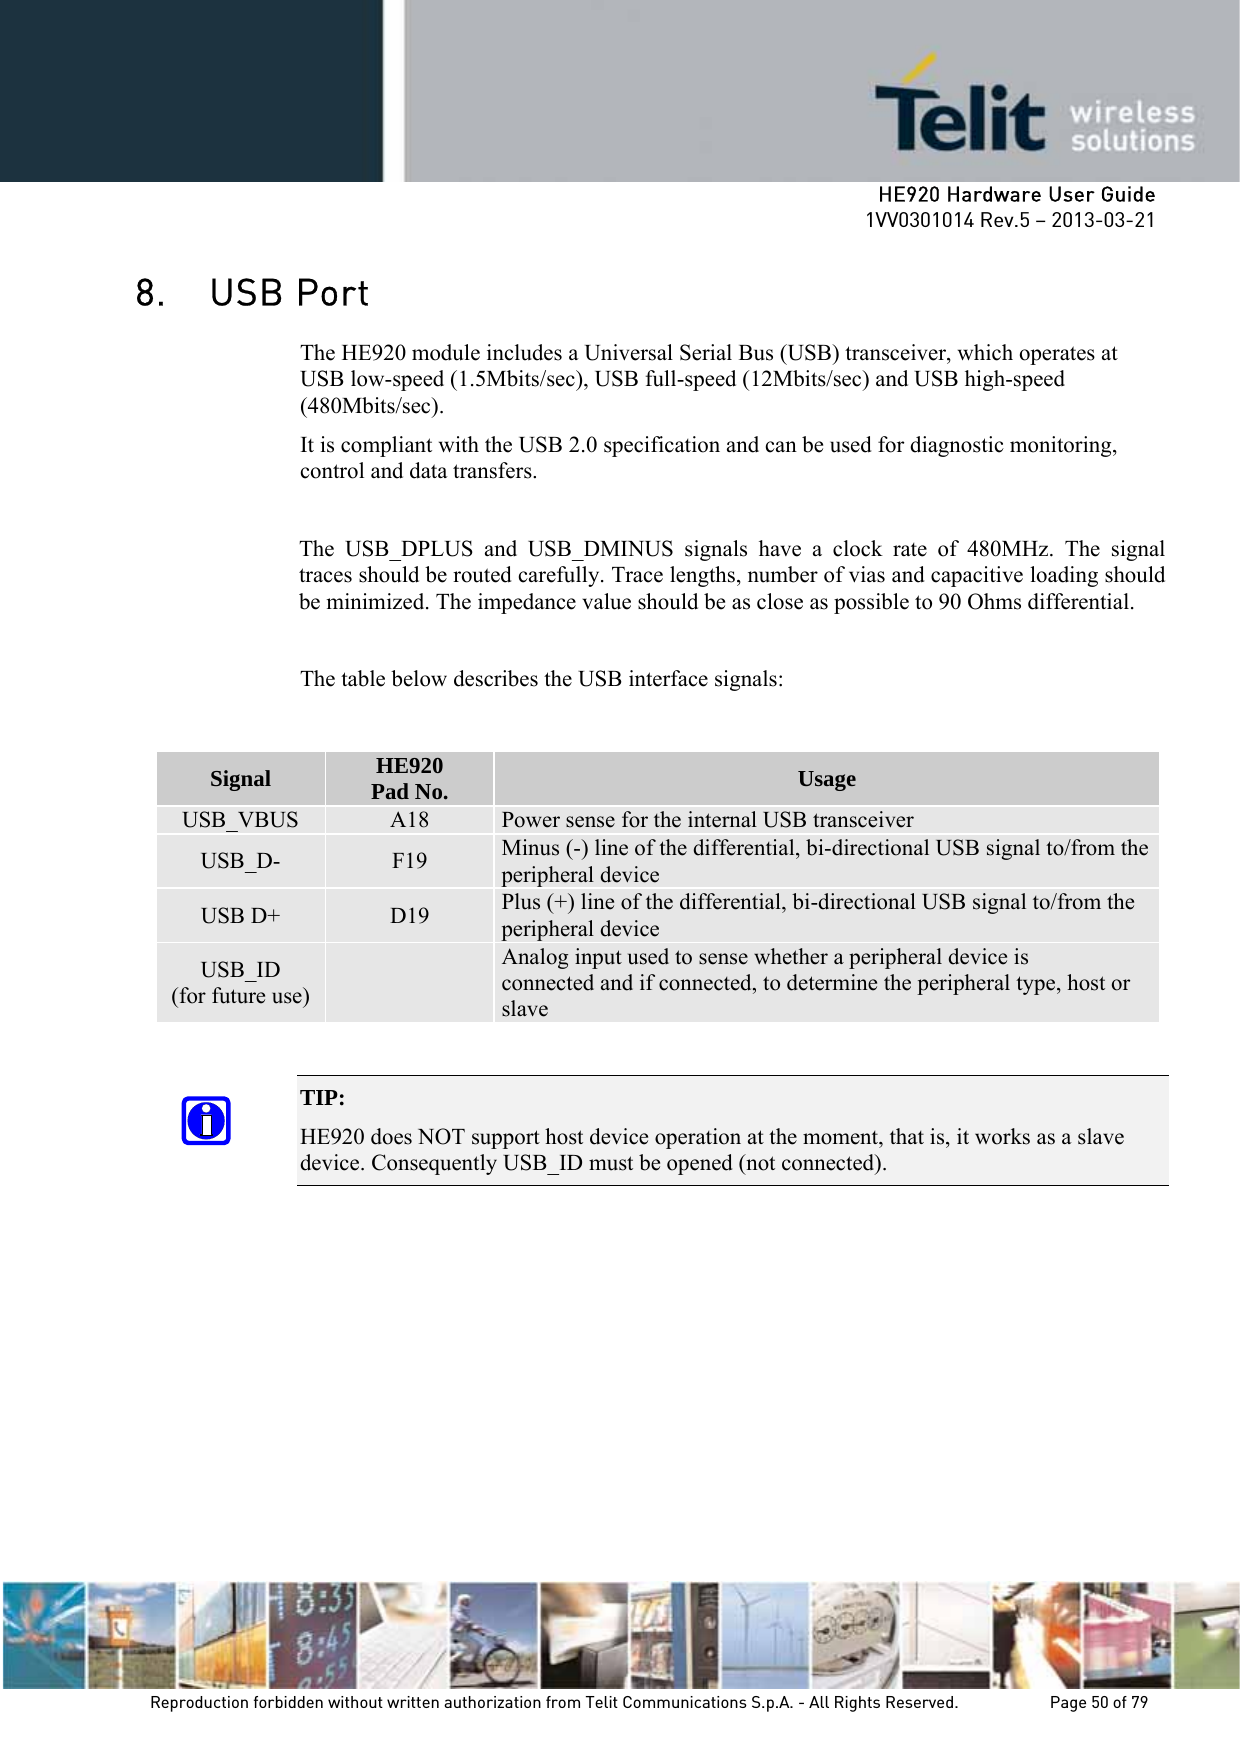     HE920 Hardware User Guide 1VV0301014 Rev.5 – 2013-03-21 Reproduction forbidden without written authorization from Telit Communications S.p.A. - All Rights Reserved.    Page 50 of 79  8. USB Port The HE920 module includes a Universal Serial Bus (USB) transceiver, which operates at USB low-speed (1.5Mbits/sec), USB full-speed (12Mbits/sec) and USB high-speed (480Mbits/sec). It is compliant with the USB 2.0 specification and can be used for diagnostic monitoring, control and data transfers.  The USB_DPLUS and USB_DMINUS signals have a clock rate of 480MHz. The signal traces should be routed carefully. Trace lengths, number of vias and capacitive loading should be minimized. The impedance value should be as close as possible to 90 Ohms differential.  The table below describes the USB interface signals:   TIP:  HE920 does NOT support host device operation at the moment, that is, it works as a slave device. Consequently USB_ID must be opened (not connected).   Signal  HE920 Pad No.  Usage USB_VBUS  A18  Power sense for the internal USB transceiver USB_D-  F19  Minus (-) line of the differential, bi-directional USB signal to/from the peripheral device USB D+  D19  Plus (+) line of the differential, bi-directional USB signal to/from the peripheral device USB_ID (for future use)   Analog input used to sense whether a peripheral device is connected and if connected, to determine the peripheral type, host or slave 